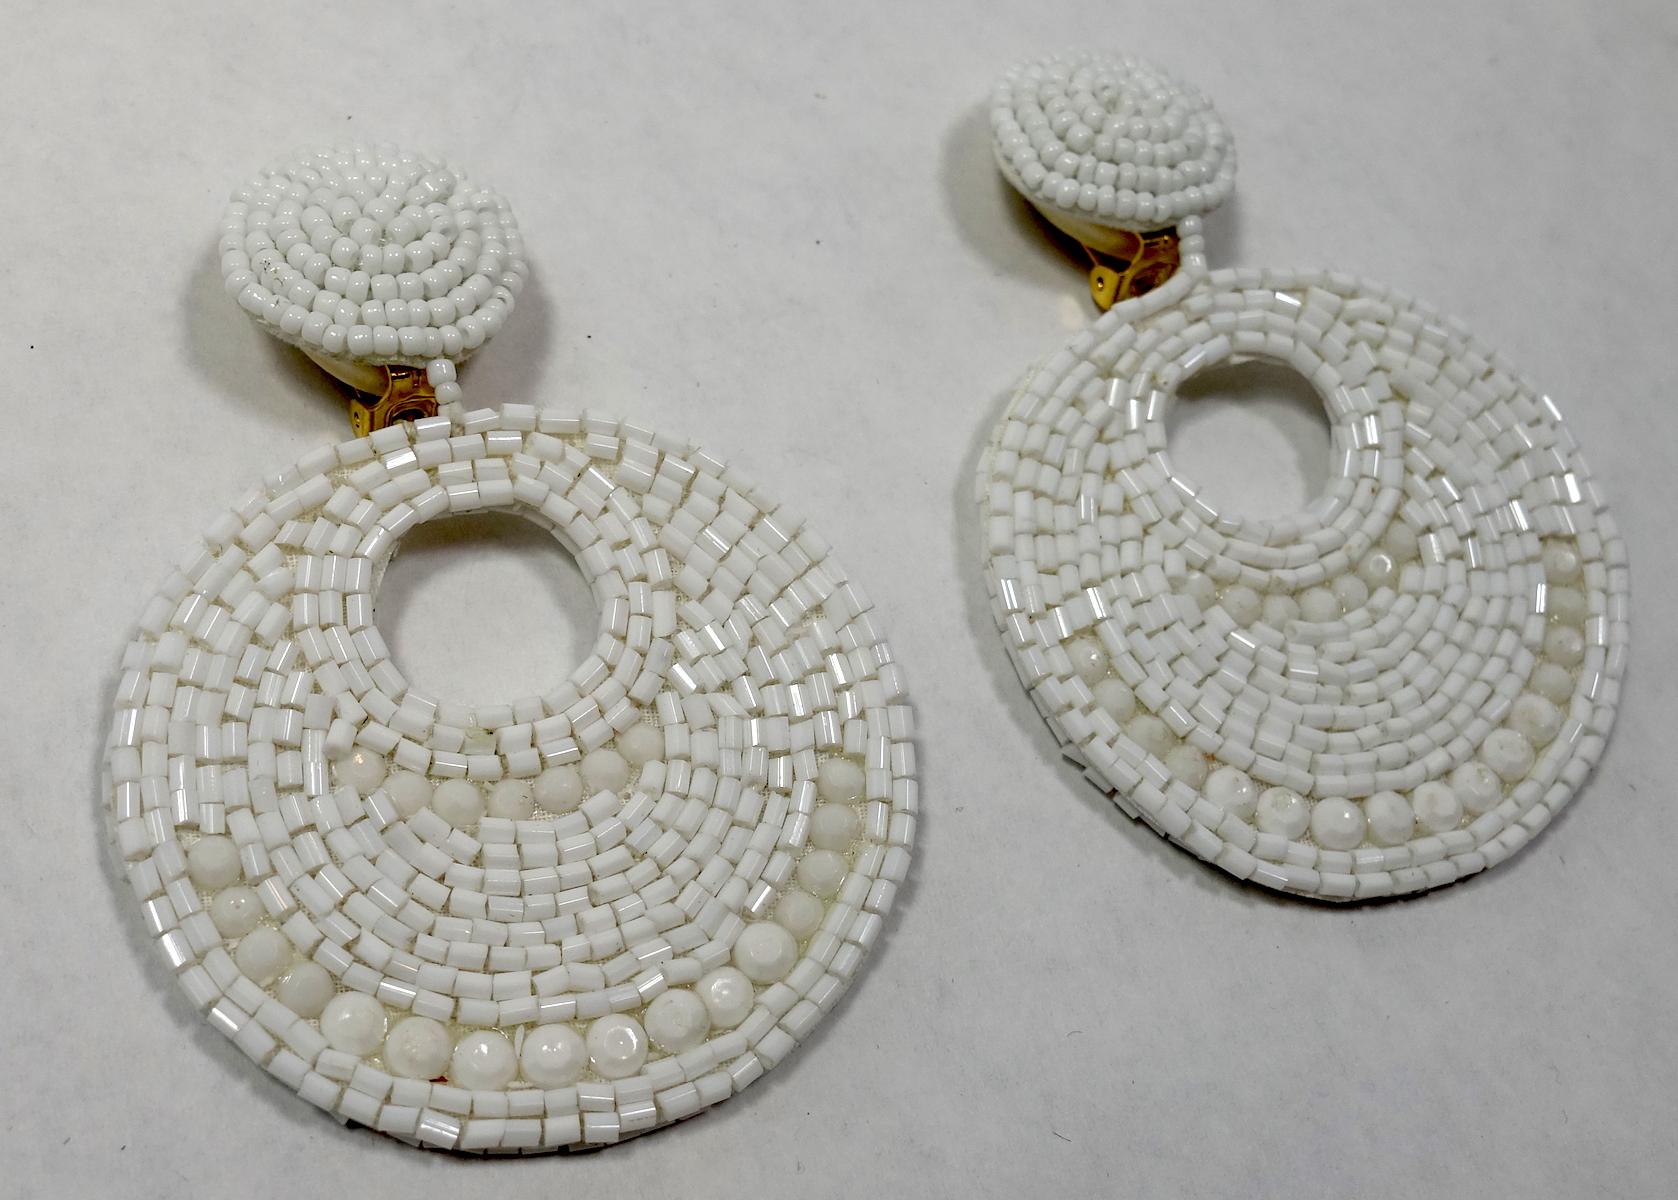 These Kenneth Jay Lane earrings are perfect for the summer.  They feature white beads in a gold-tone setting.  These clip earrings measure 3-1/2” x 2-3/8” and are signed “Kenneth Lane”. These earrings are in excellent condition.